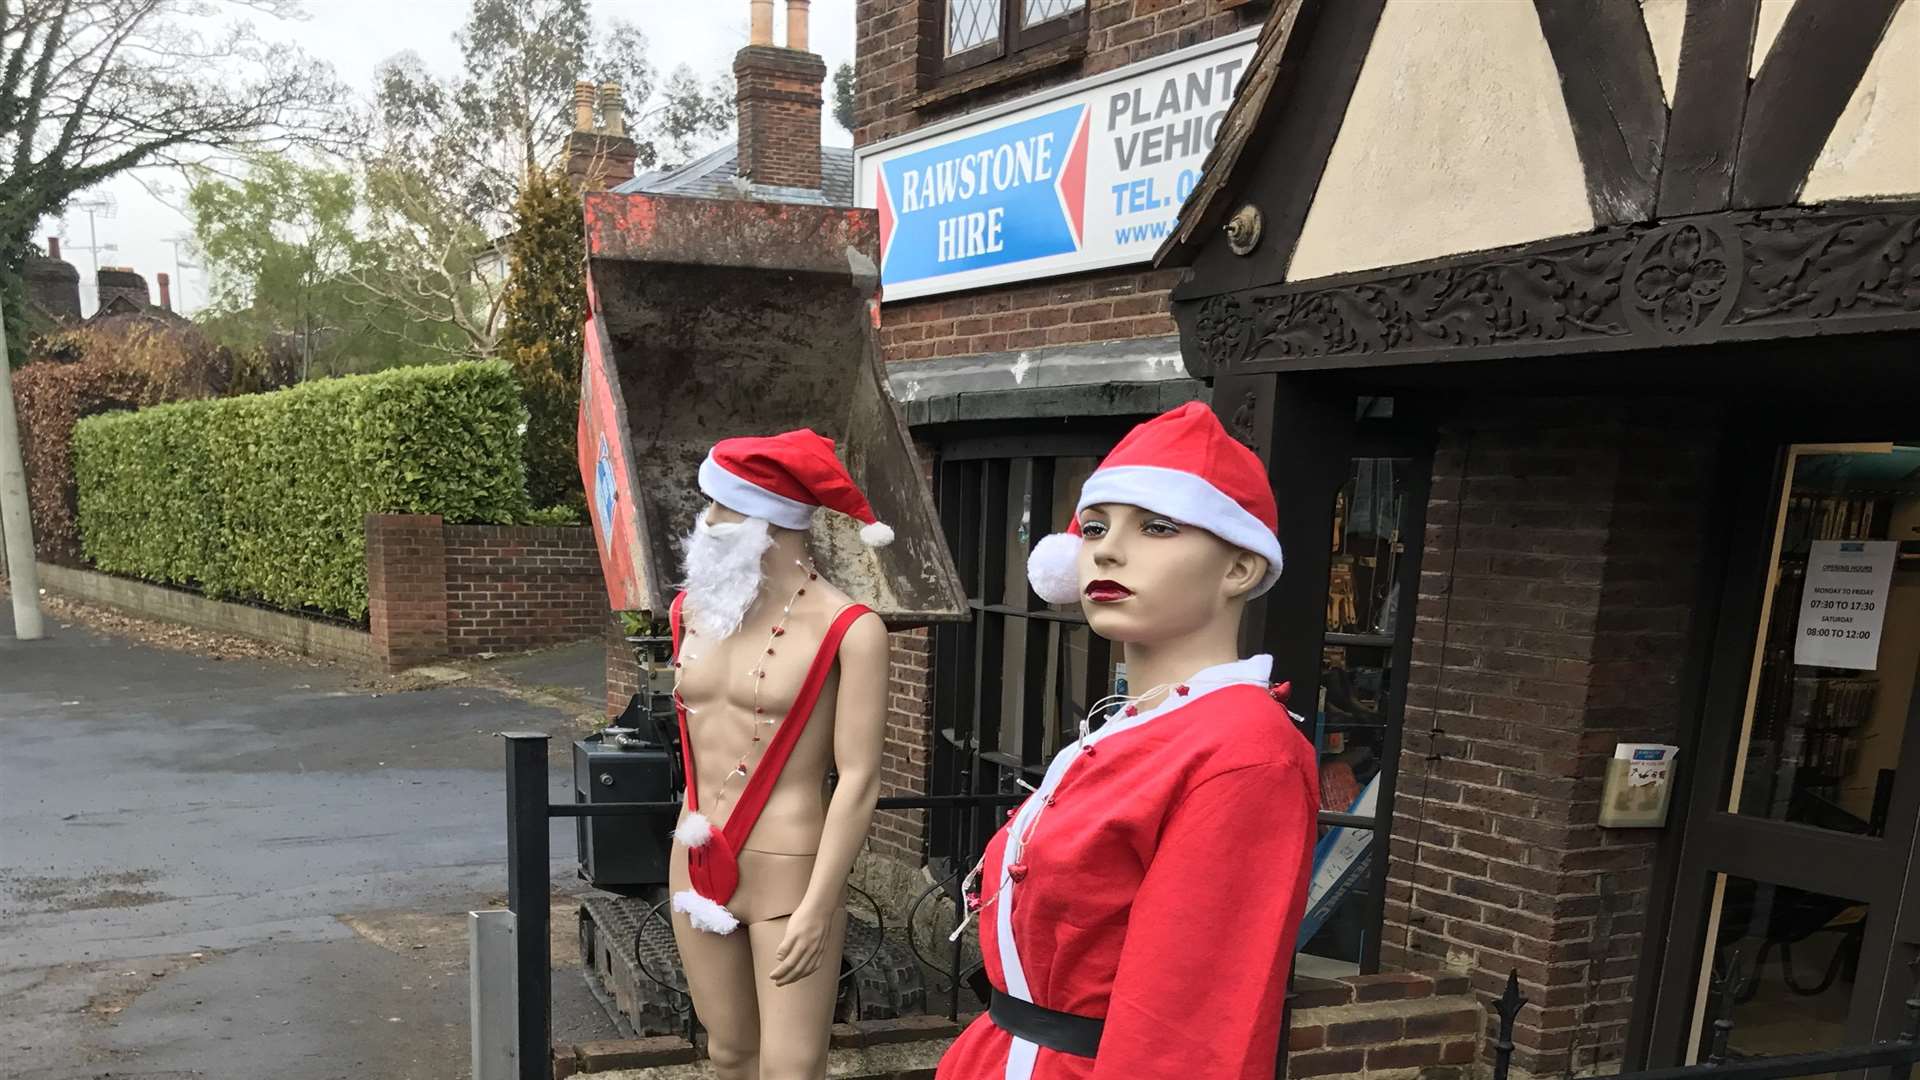 The mannequins are outside Rawstone Hire in Riverhead. Picture: Richard Phipps